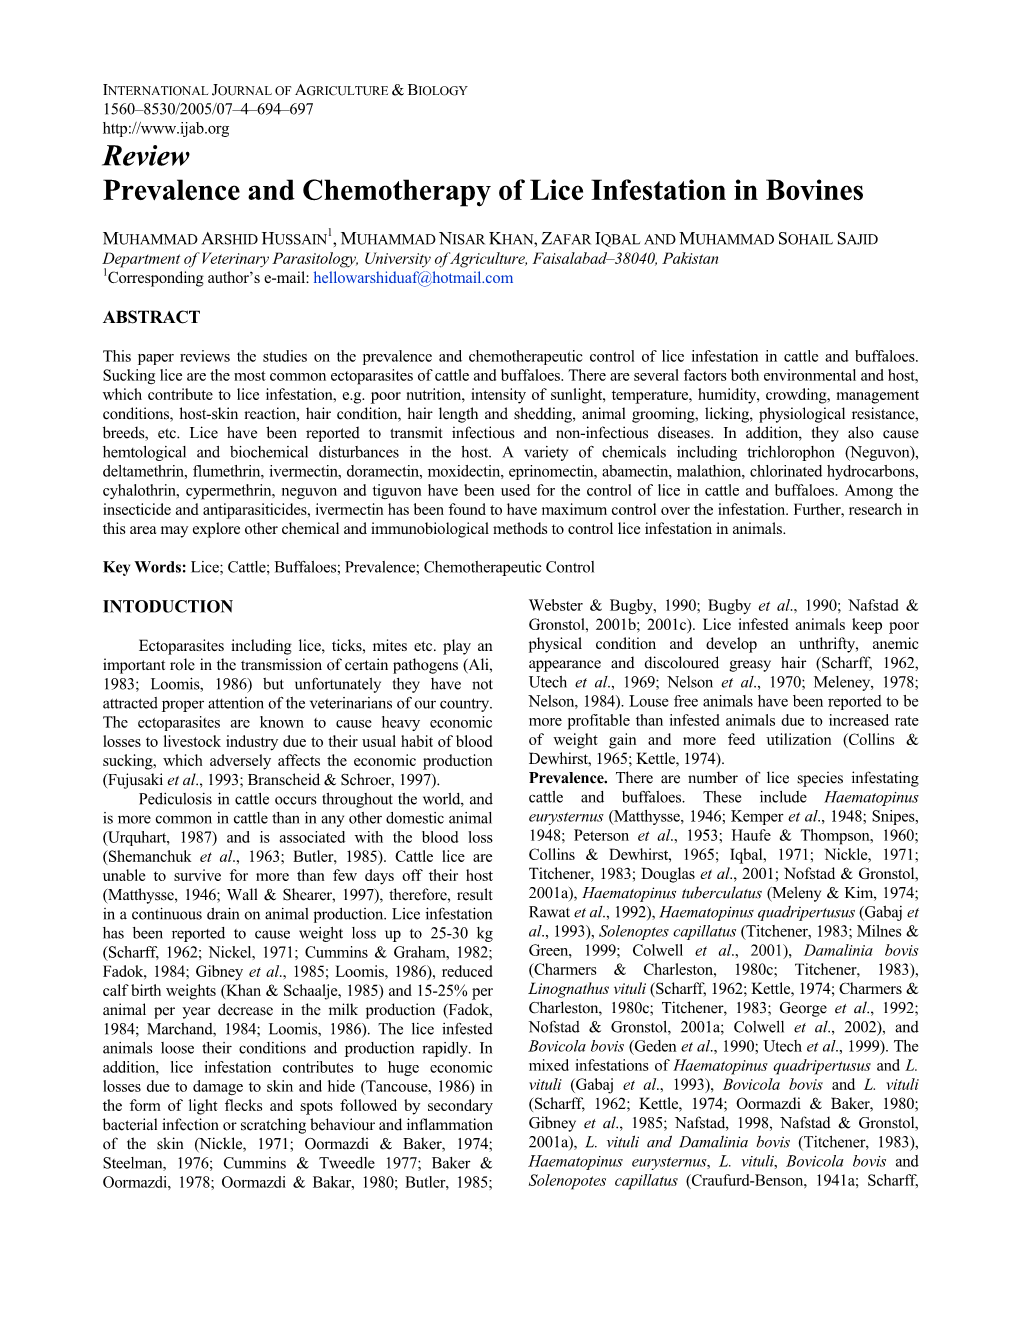 Review Prevalence and Chemotherapy of Lice Infestation in Bovines